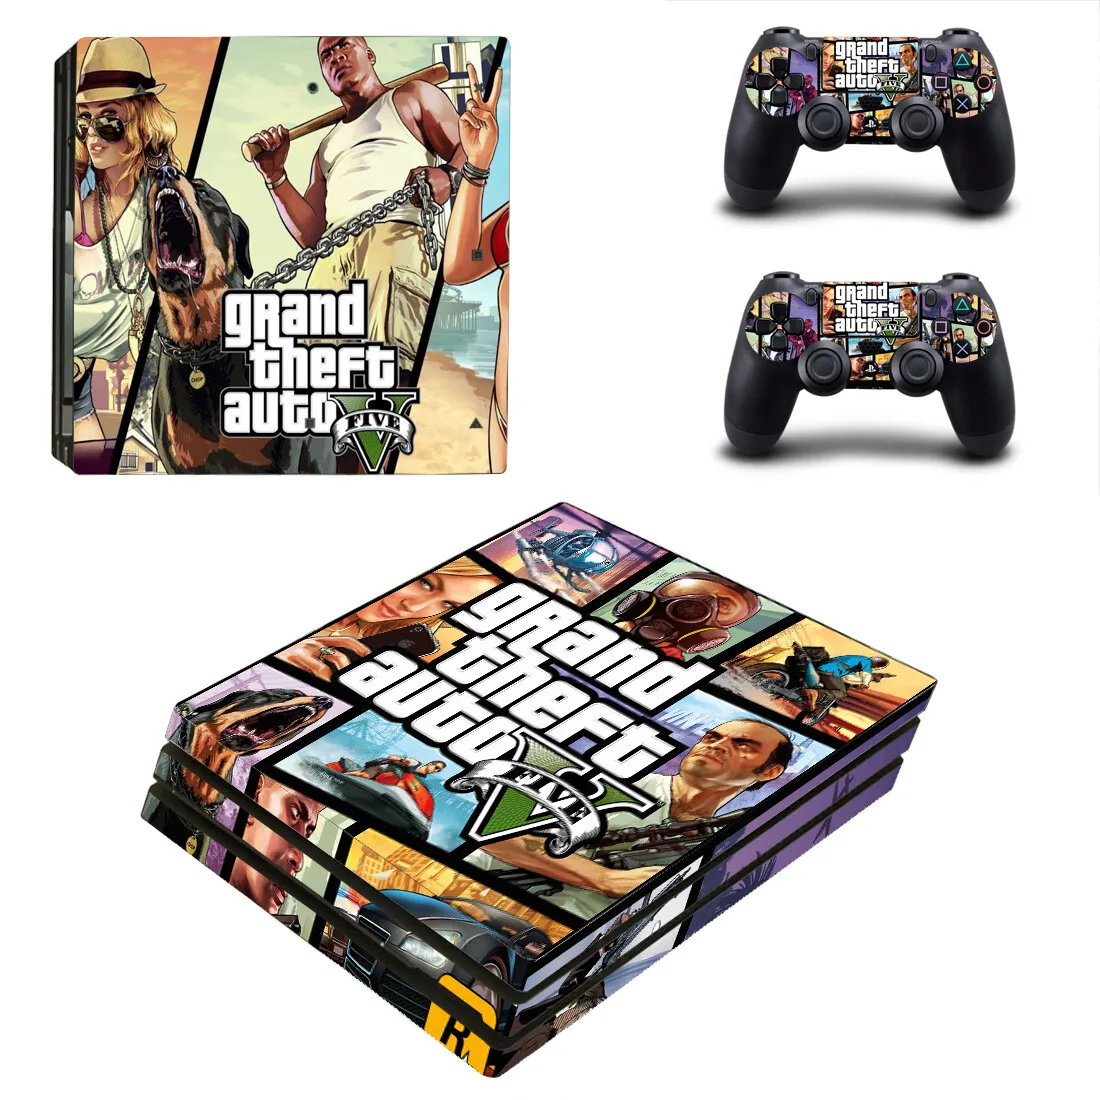 Grand Theft Auto V Gta 5 Ps4 Pro Skin Sticker Decals Cover For Playstation  4 Ps4 Pro Console & Controller Skins Vinyl - Stickers - AliExpress